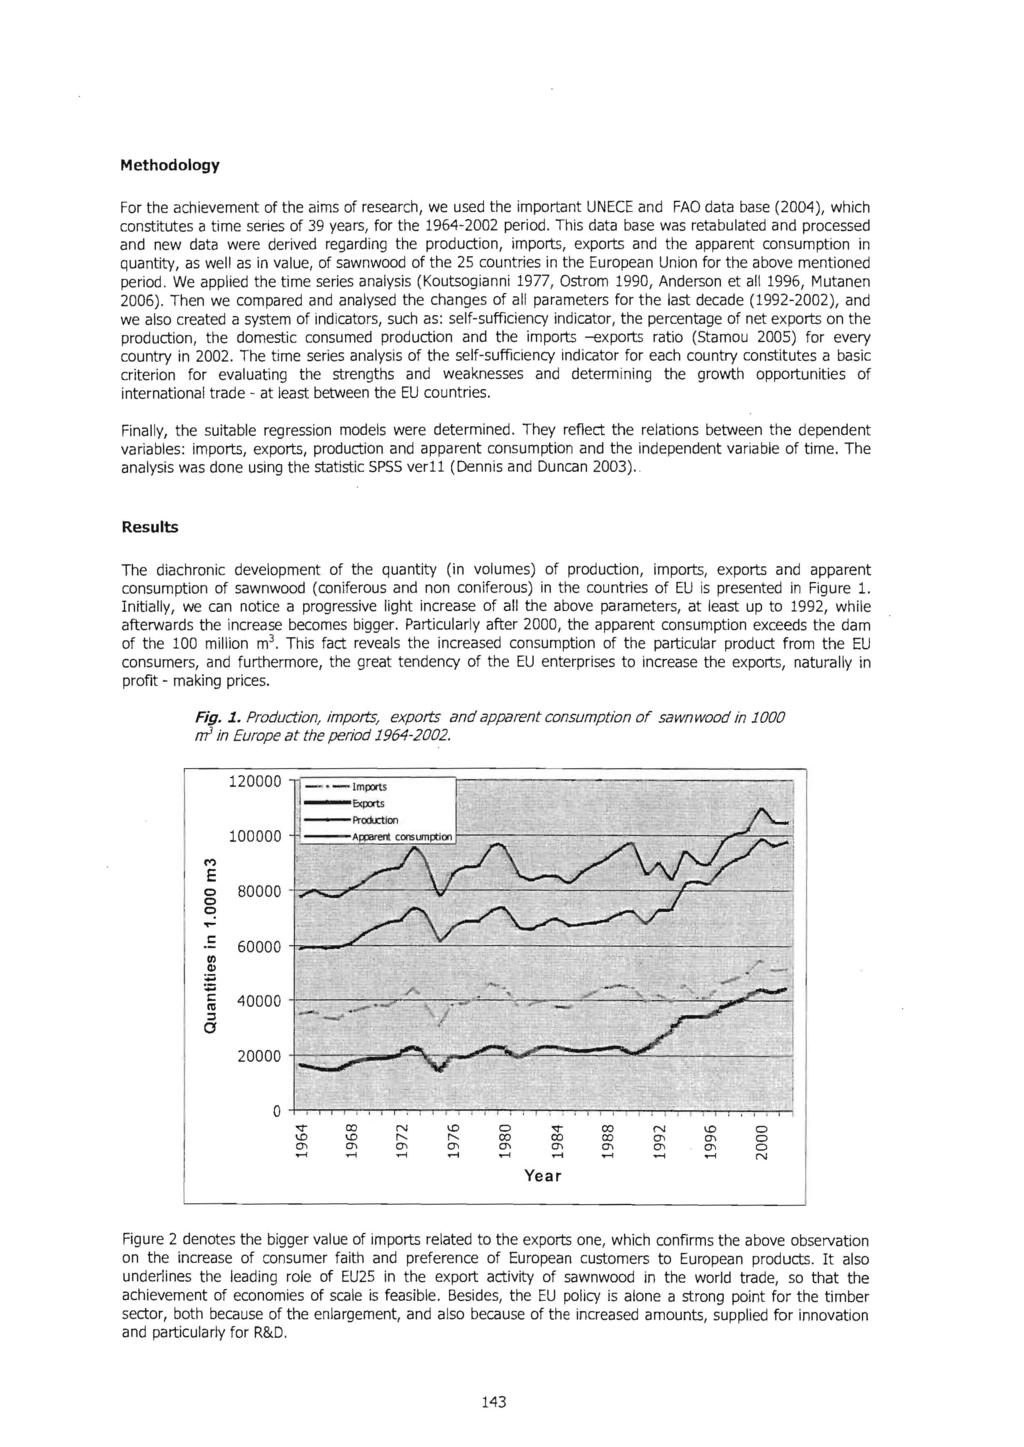 Methodology For the achievement of the aims of research, we used the important UNECE and FAD data base (2004), which constitutes a time series of 39 years, for the 1964-2002 period.